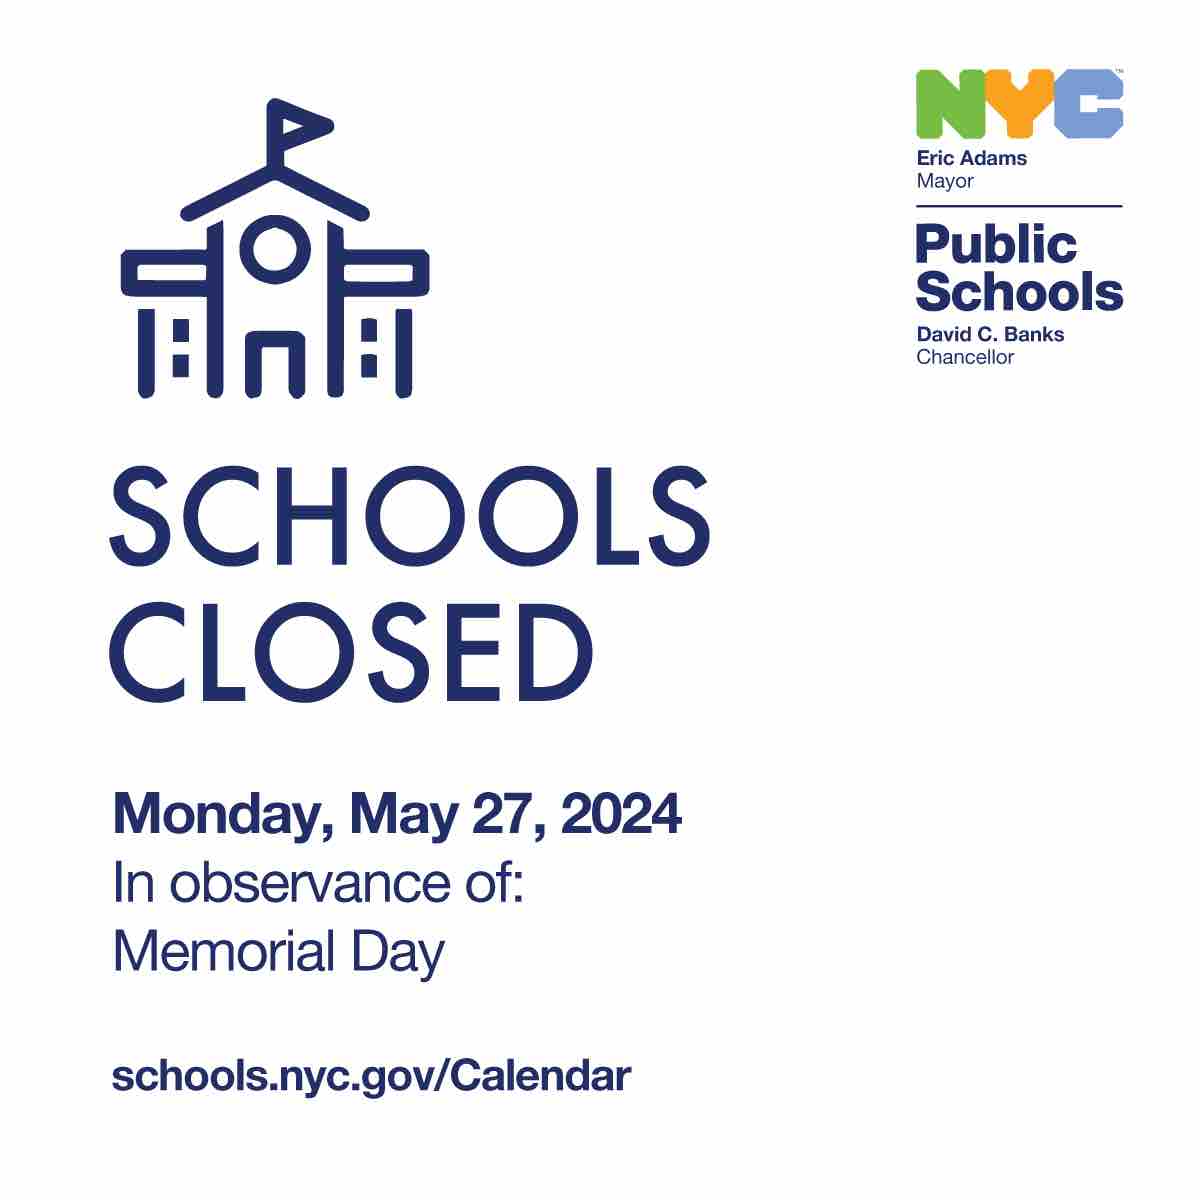 REMINDER: New York City Public Schools will be closed on Monday, May 27, 2024 in observance of Memorial Day. schools.nyc.gov/calendar